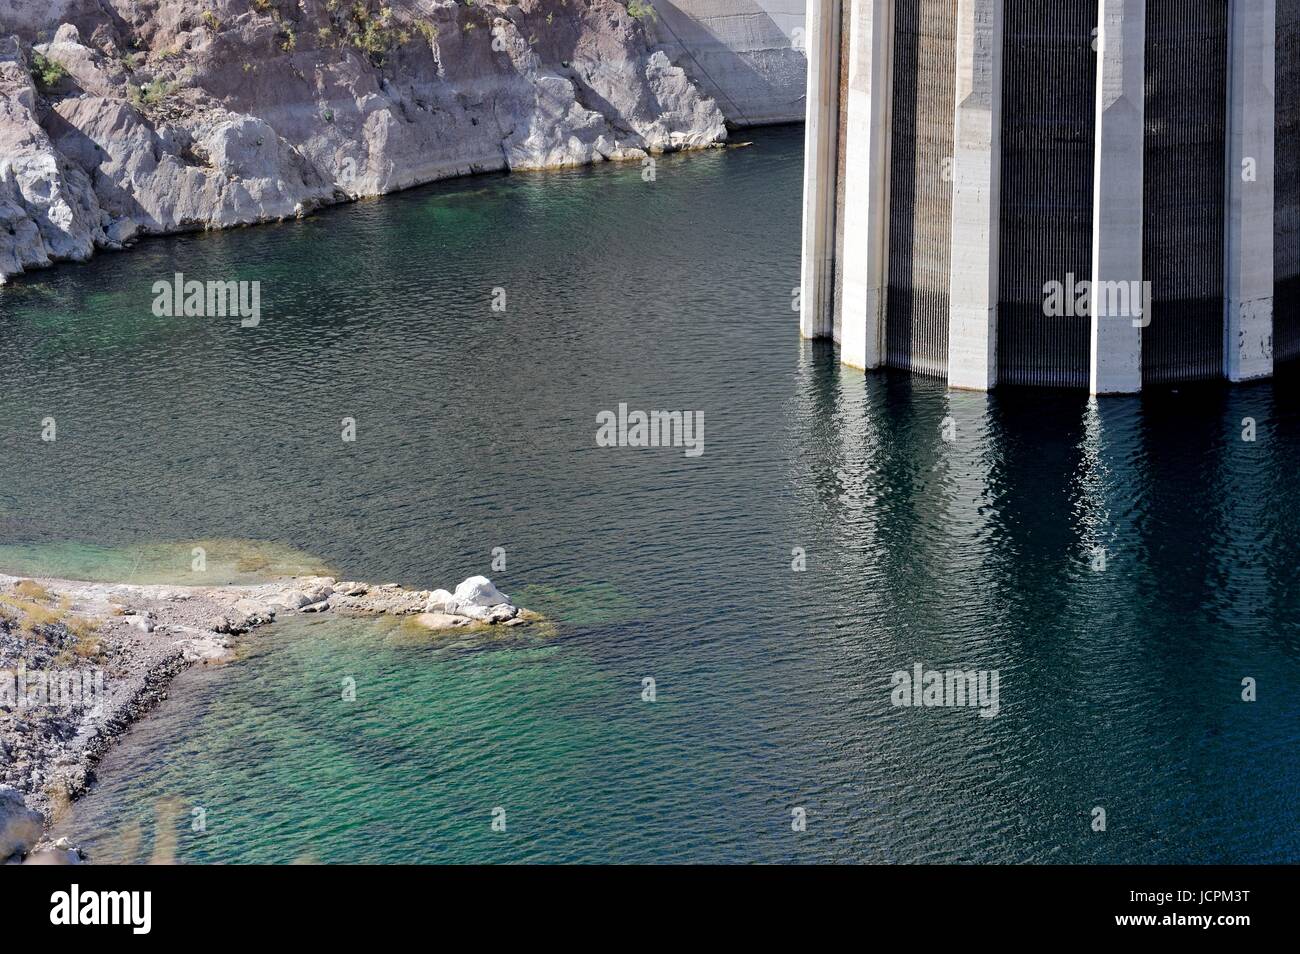 Intake towers base detail for the hydro plant on the Hoover Dam, Lake Mead, Nevada, USA Stock Photo